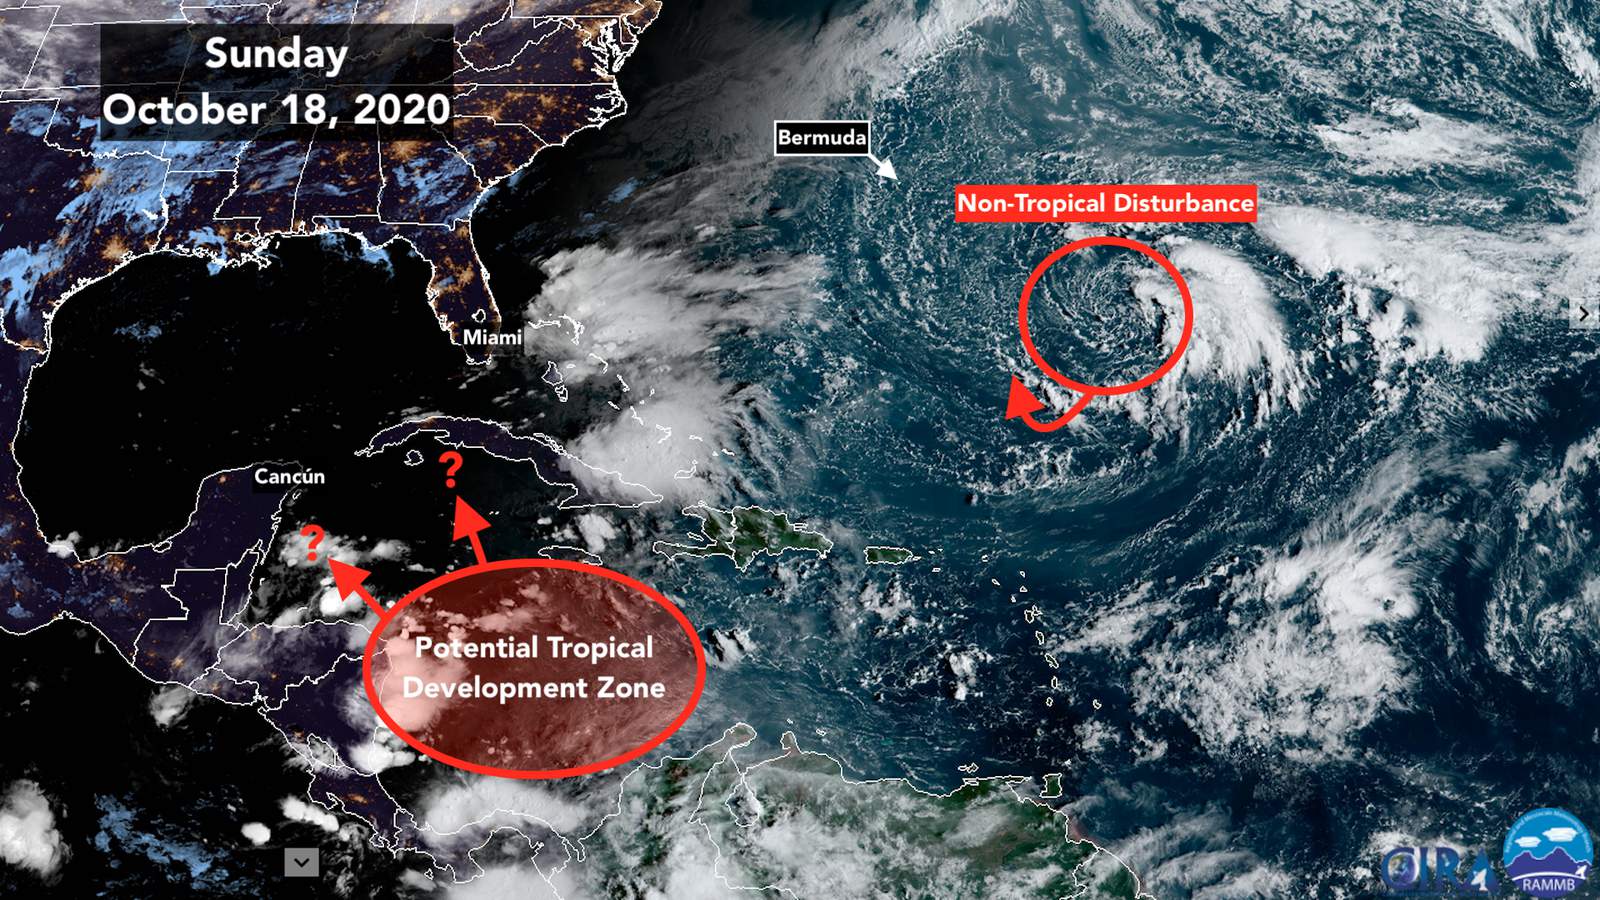 Storm still trying to form in the Atlantic and slow developments in the Caribbean